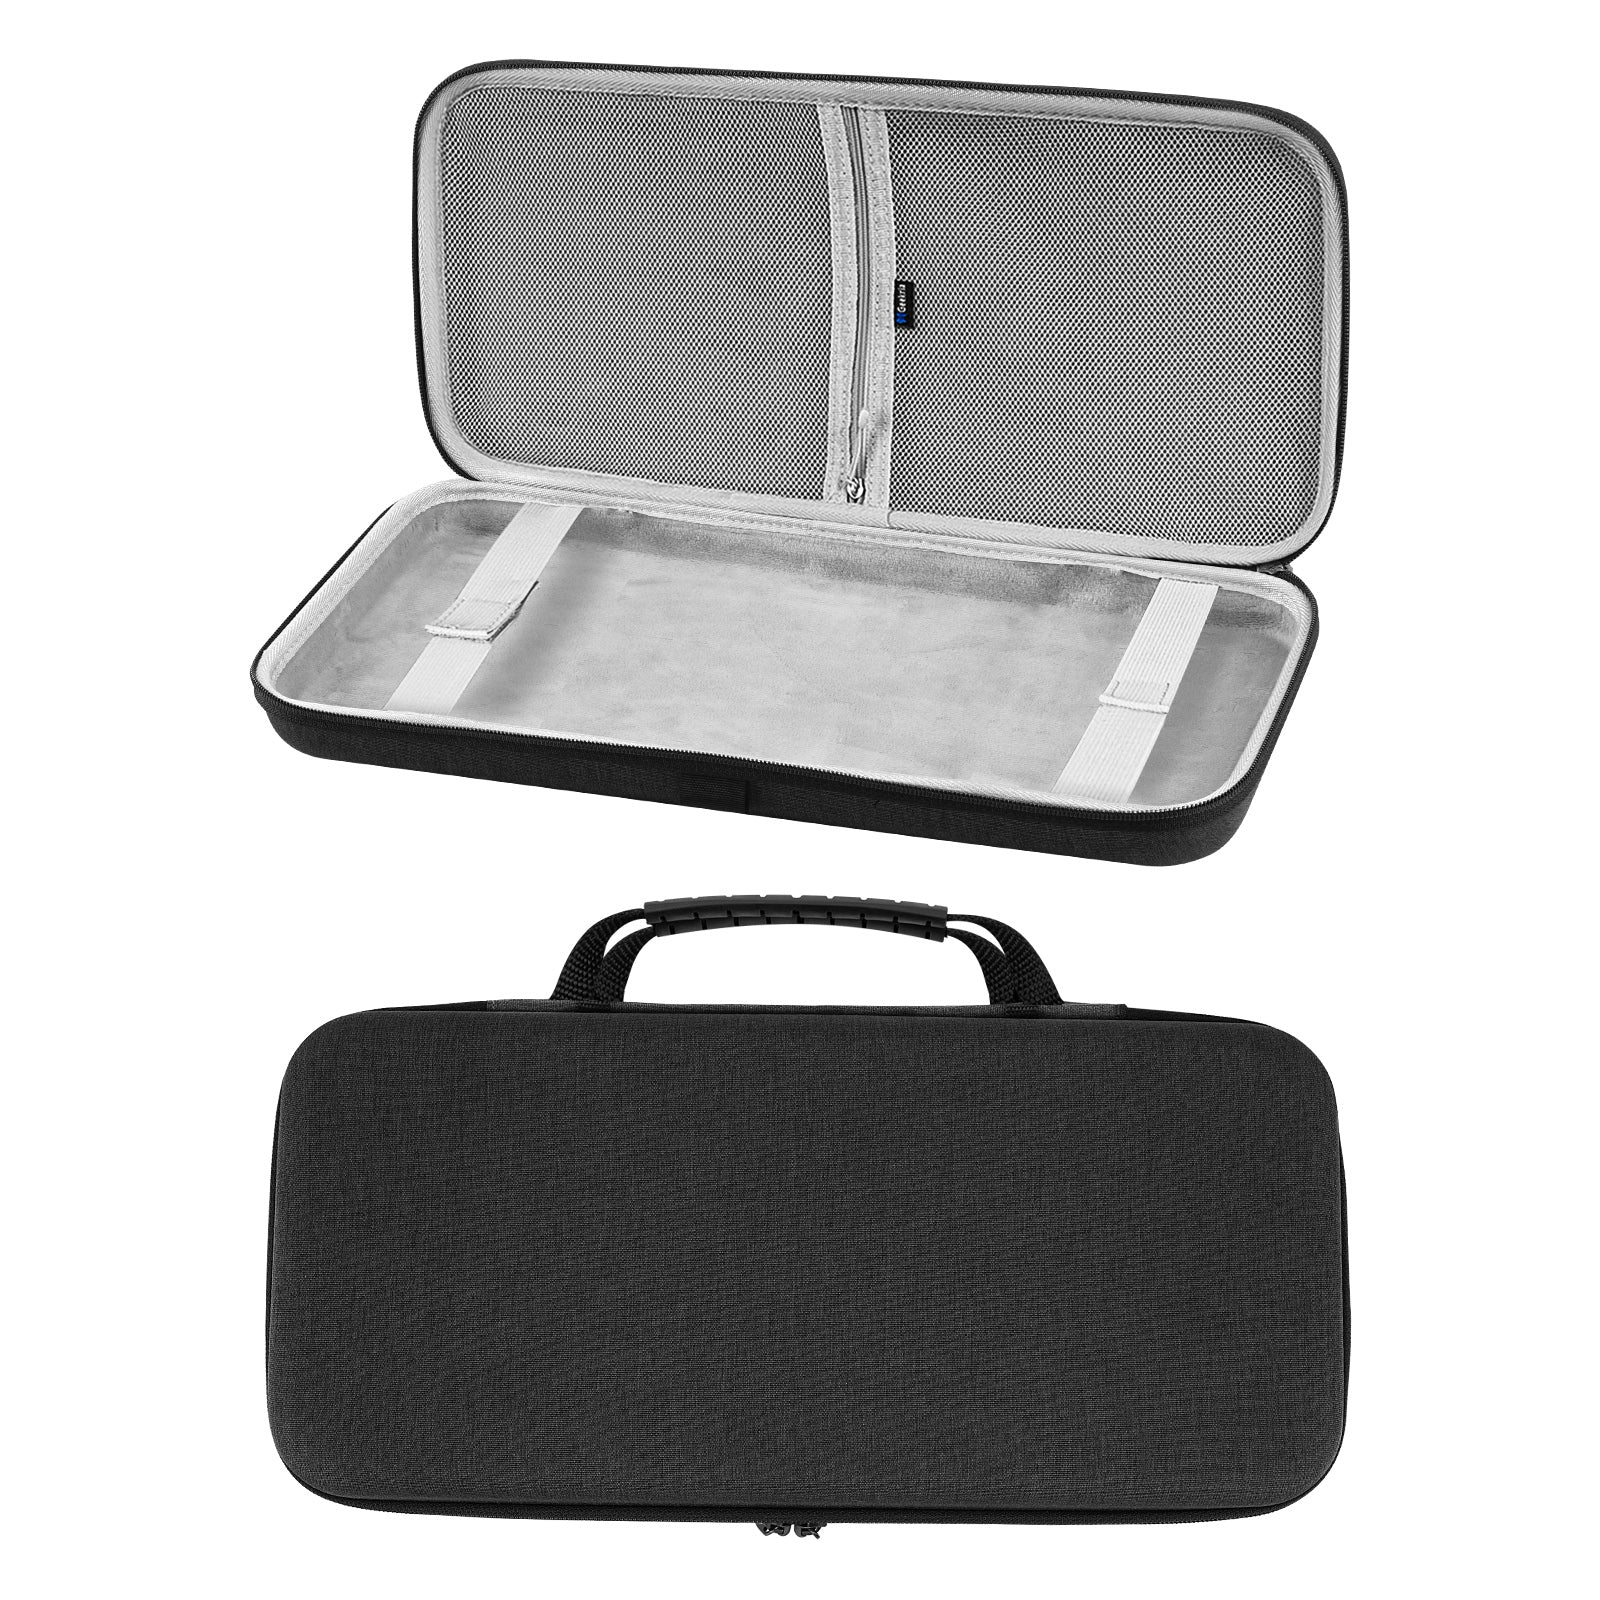 ProCase Eva Hard Travel Tech Organizer Case Bag for Electronics Accessories  Charger Cord Portable External Hard Drive USB Cables Power Bank SD Memory  Cards Earphone Flash Drive : Amazon.in: Electronics